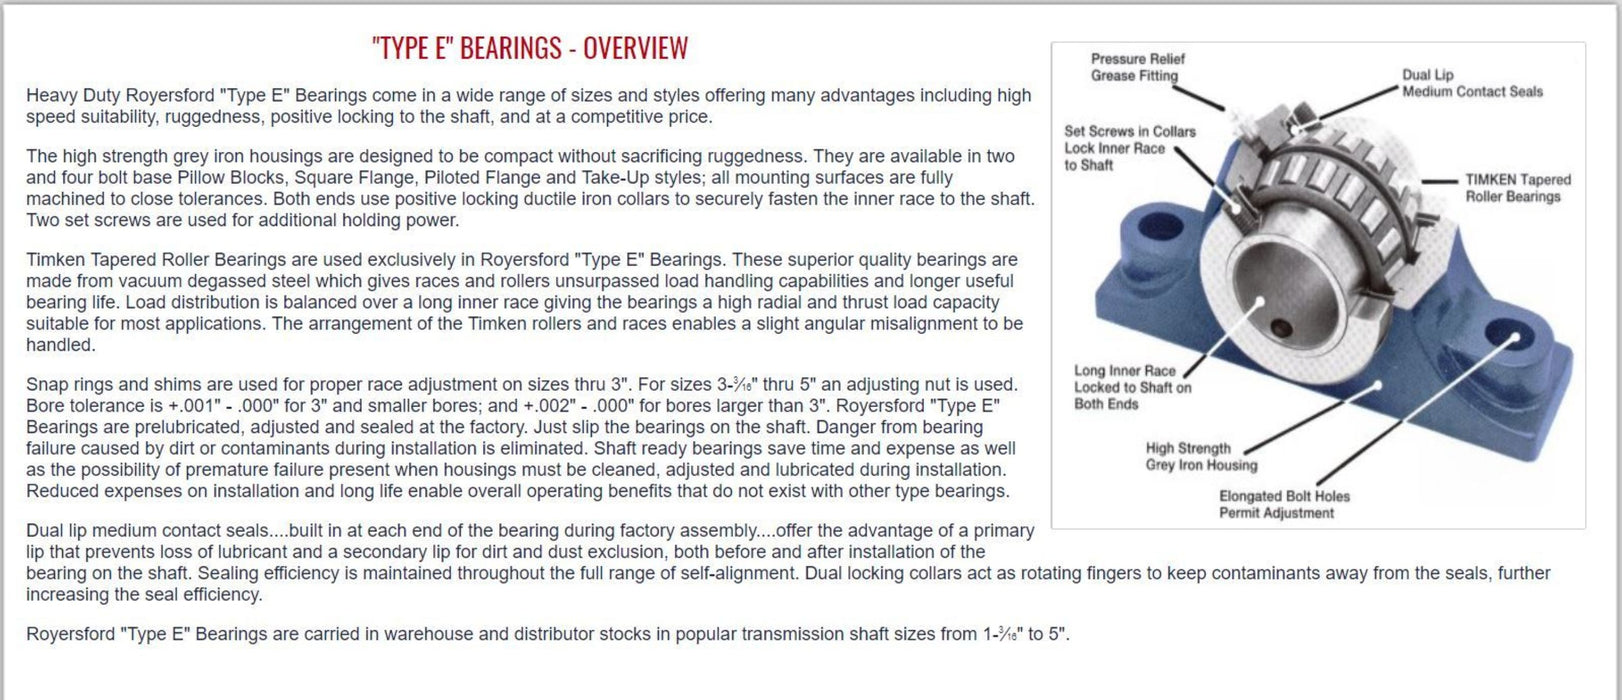 20-05-0104, Royersford Type E 4 Bolt Square Flange Bearing, 1-1/4 with Timken Tapered Roller Bearings